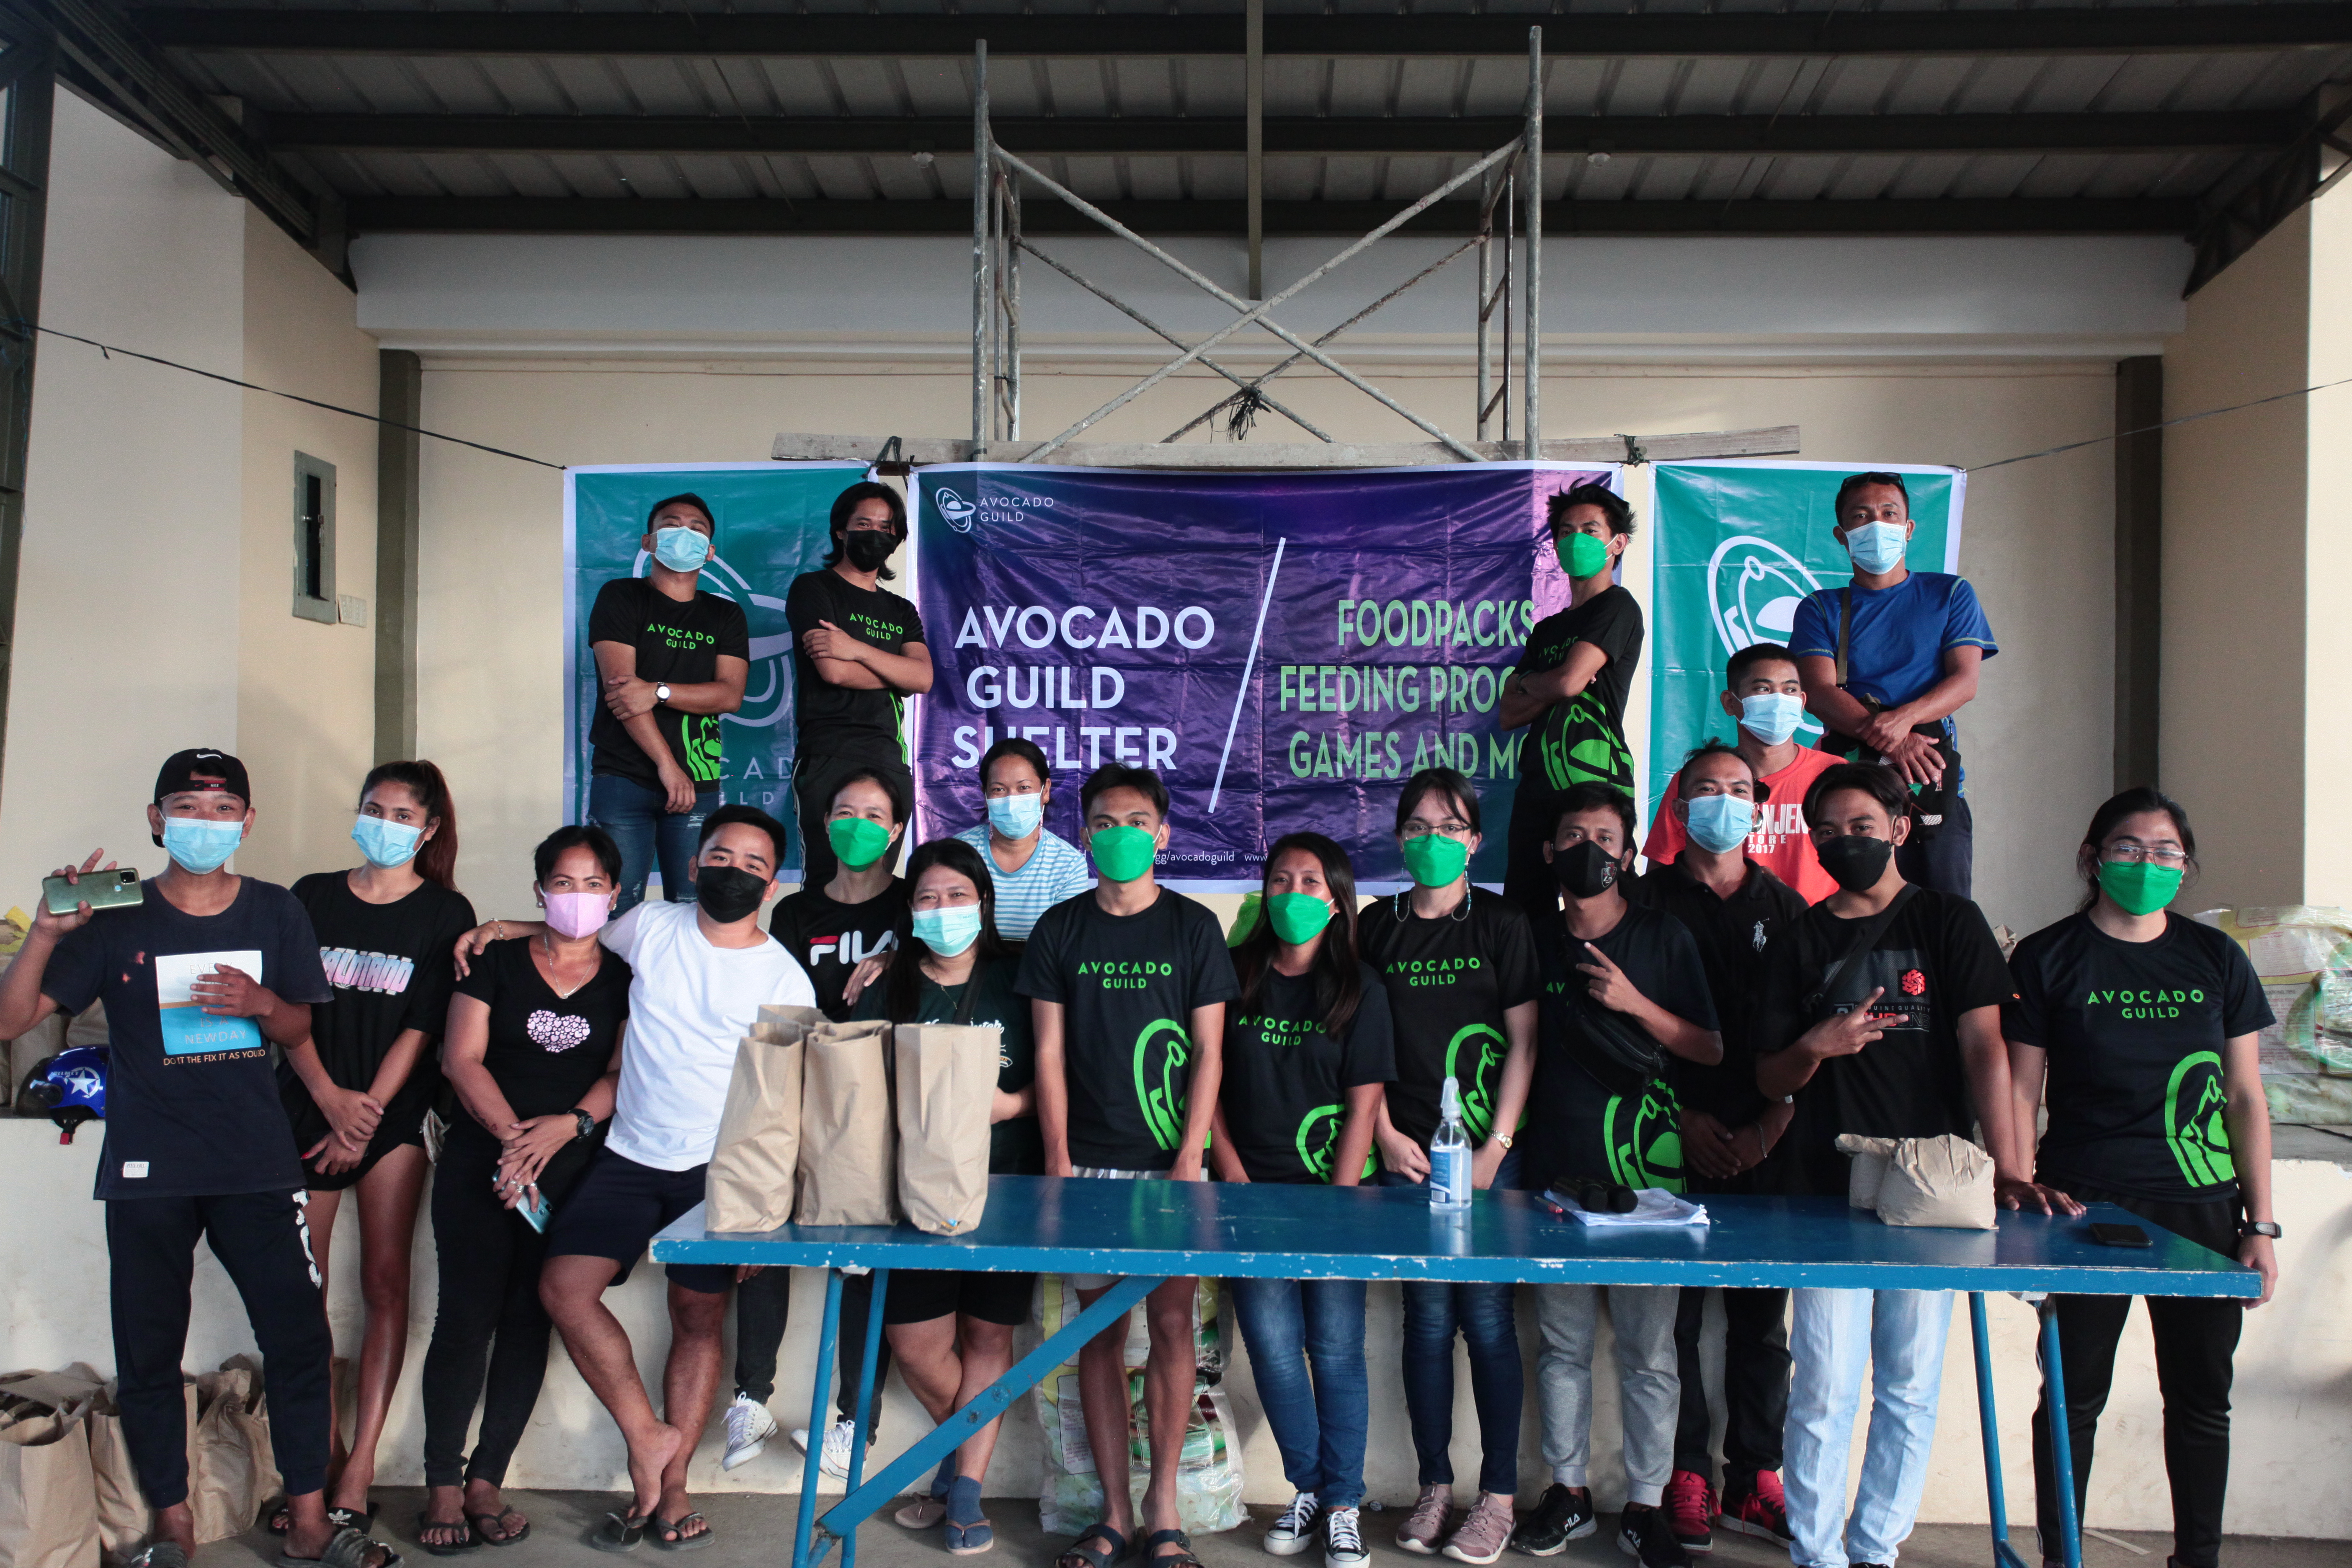 Our Local Heroes after the successful event! Congratulations, the guild is very much proud to have you as its leaders.